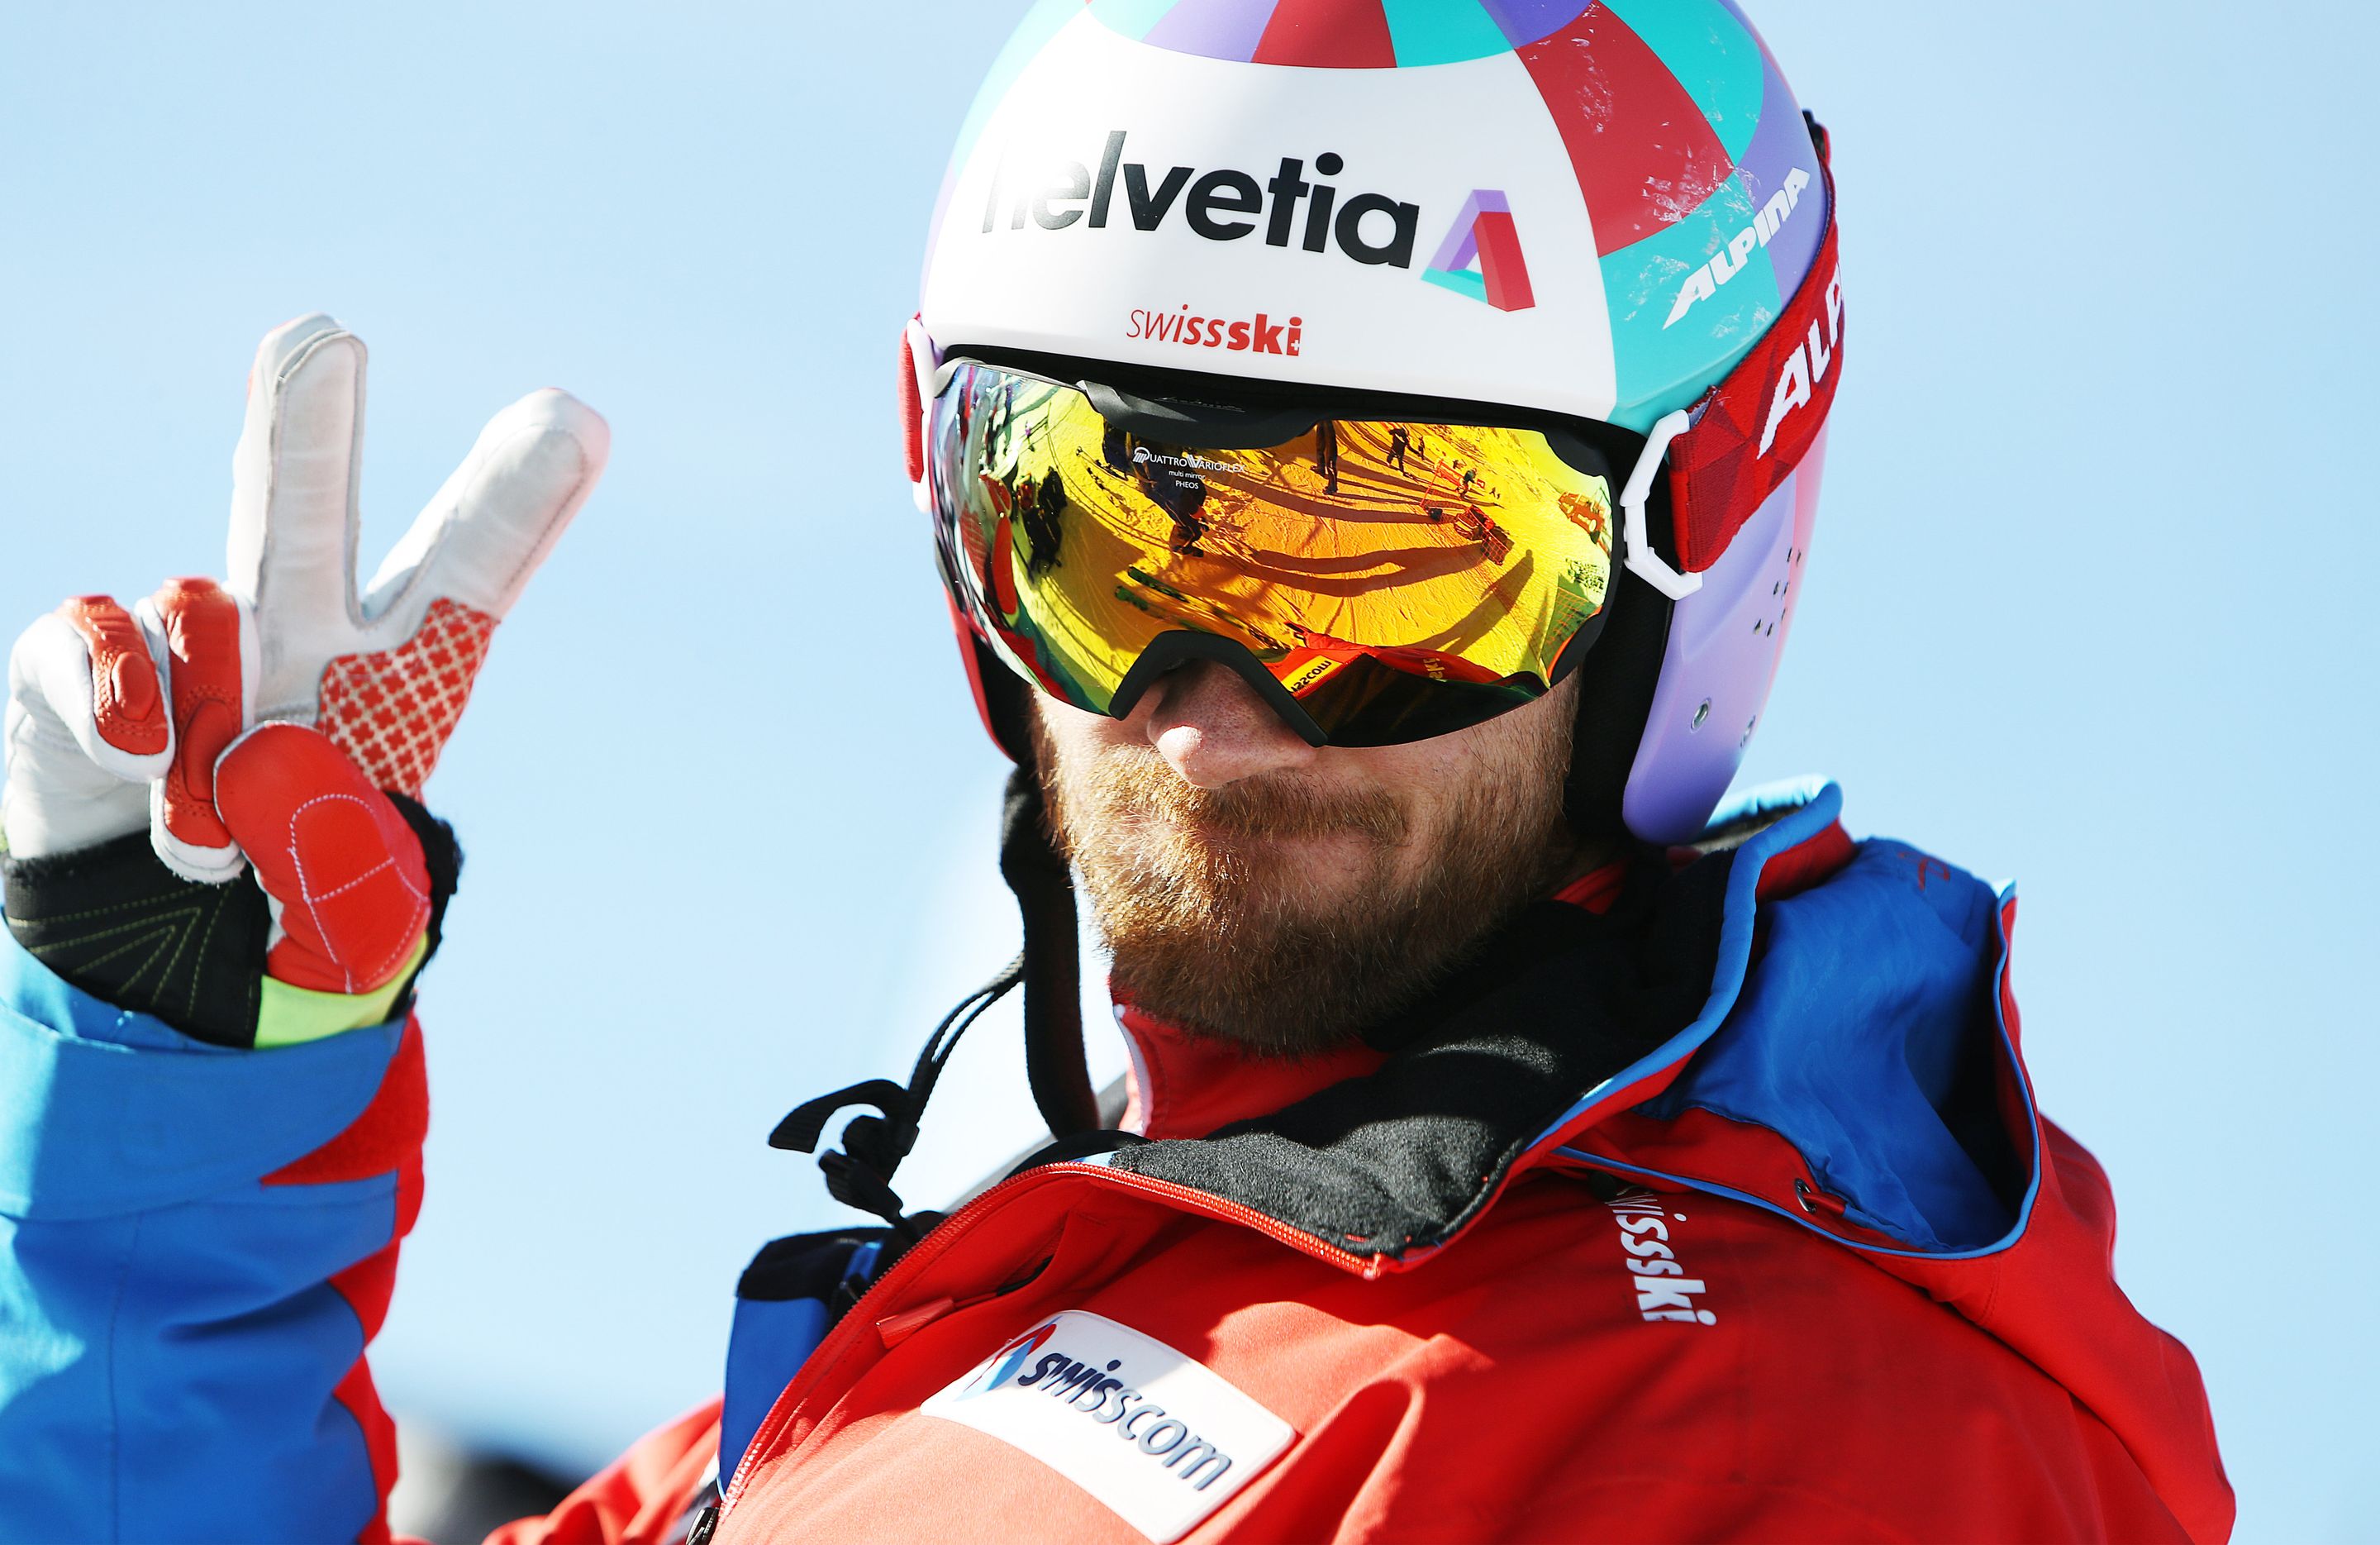 © GEPA - Alex Fiva is going for World Cup start number 100 at the Val Thorens season kick-off